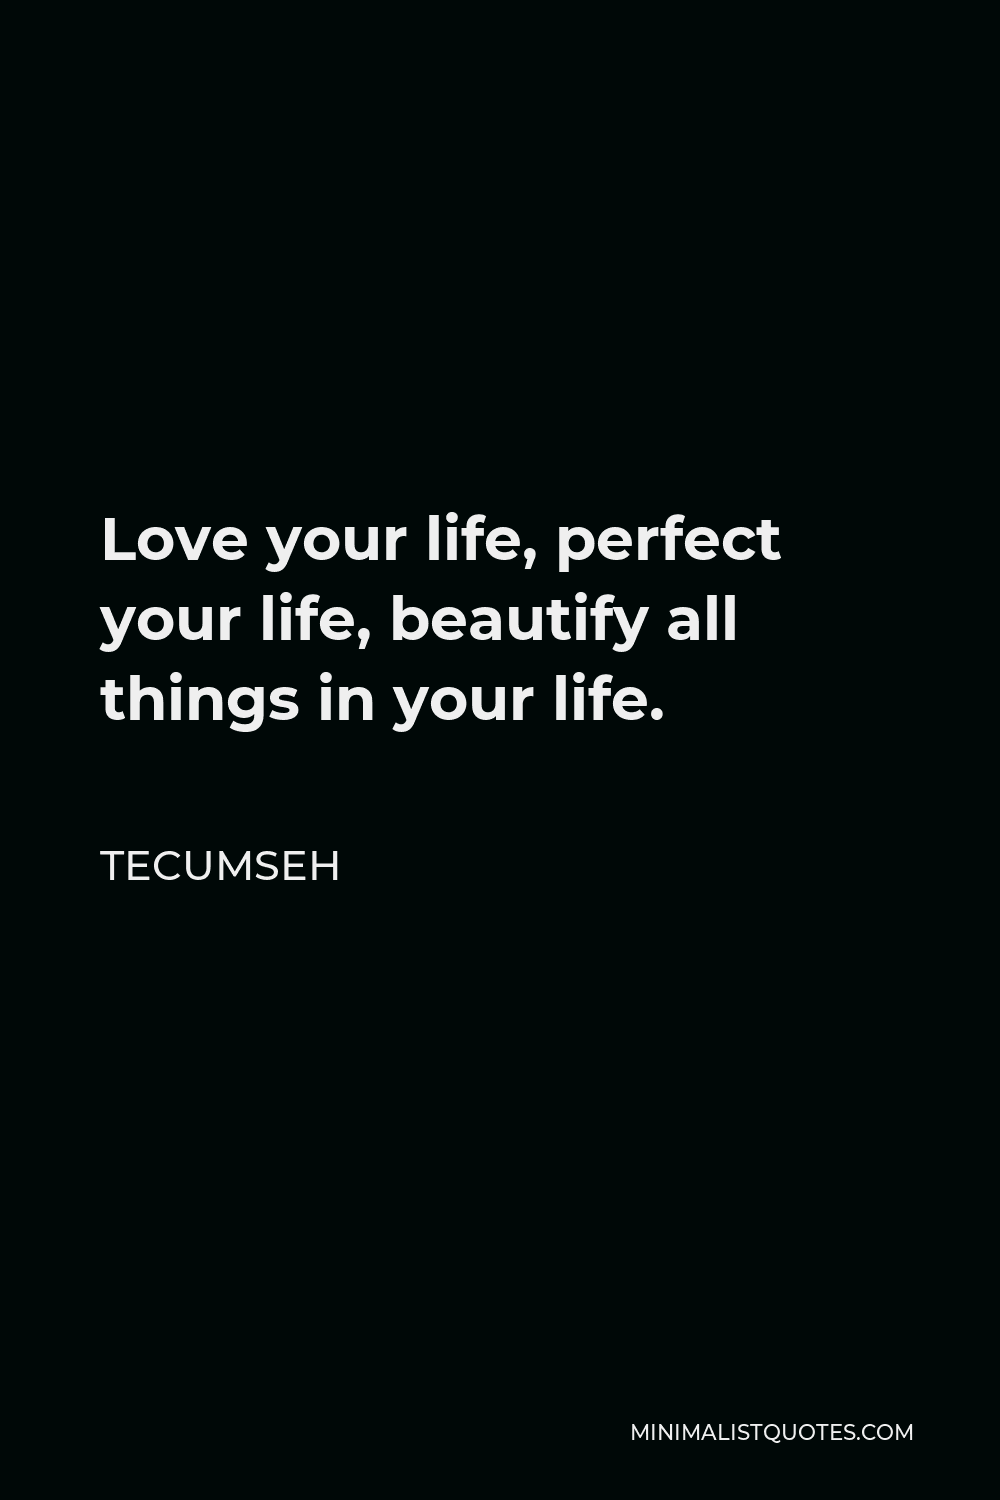 Tecumseh Quote - Love your life, perfect your life, beautify all things in your life.